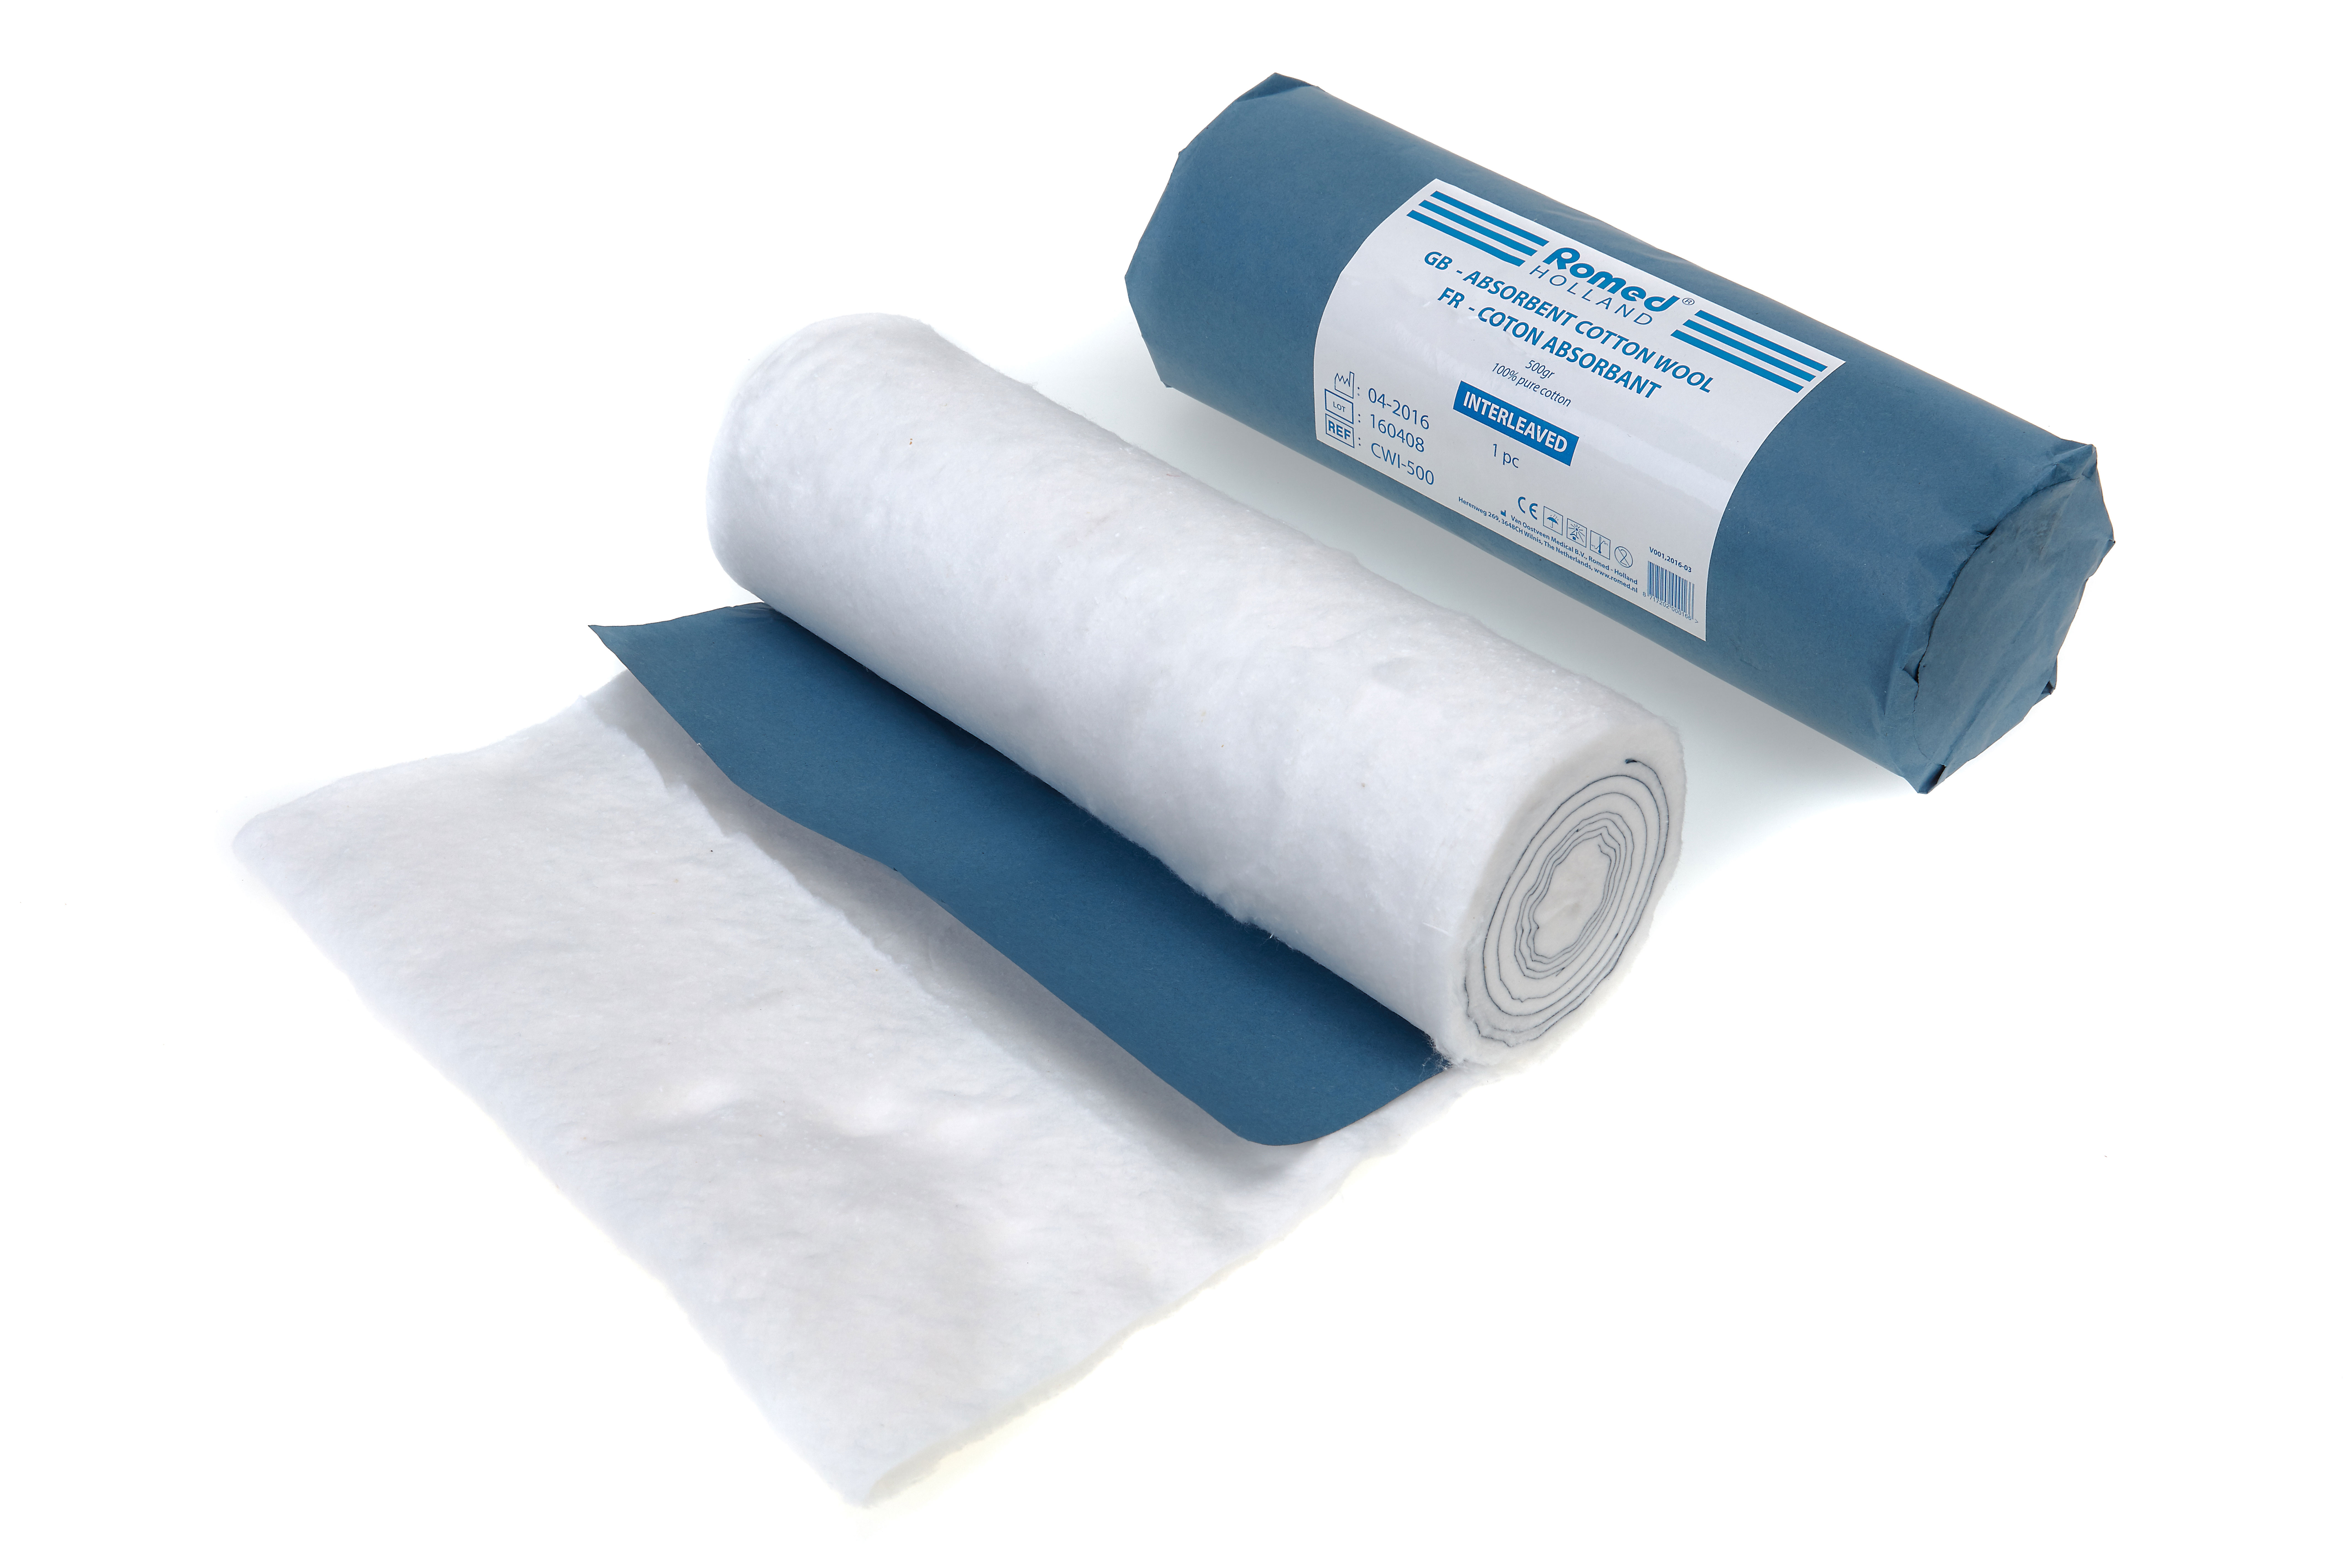 CWI-500 Romed absorbent cotton wool, 500 gr., degreased and bleached, interleaved, with blue paper: end cut, 100% pure cotton, per piece, 30 rolls in a carton.